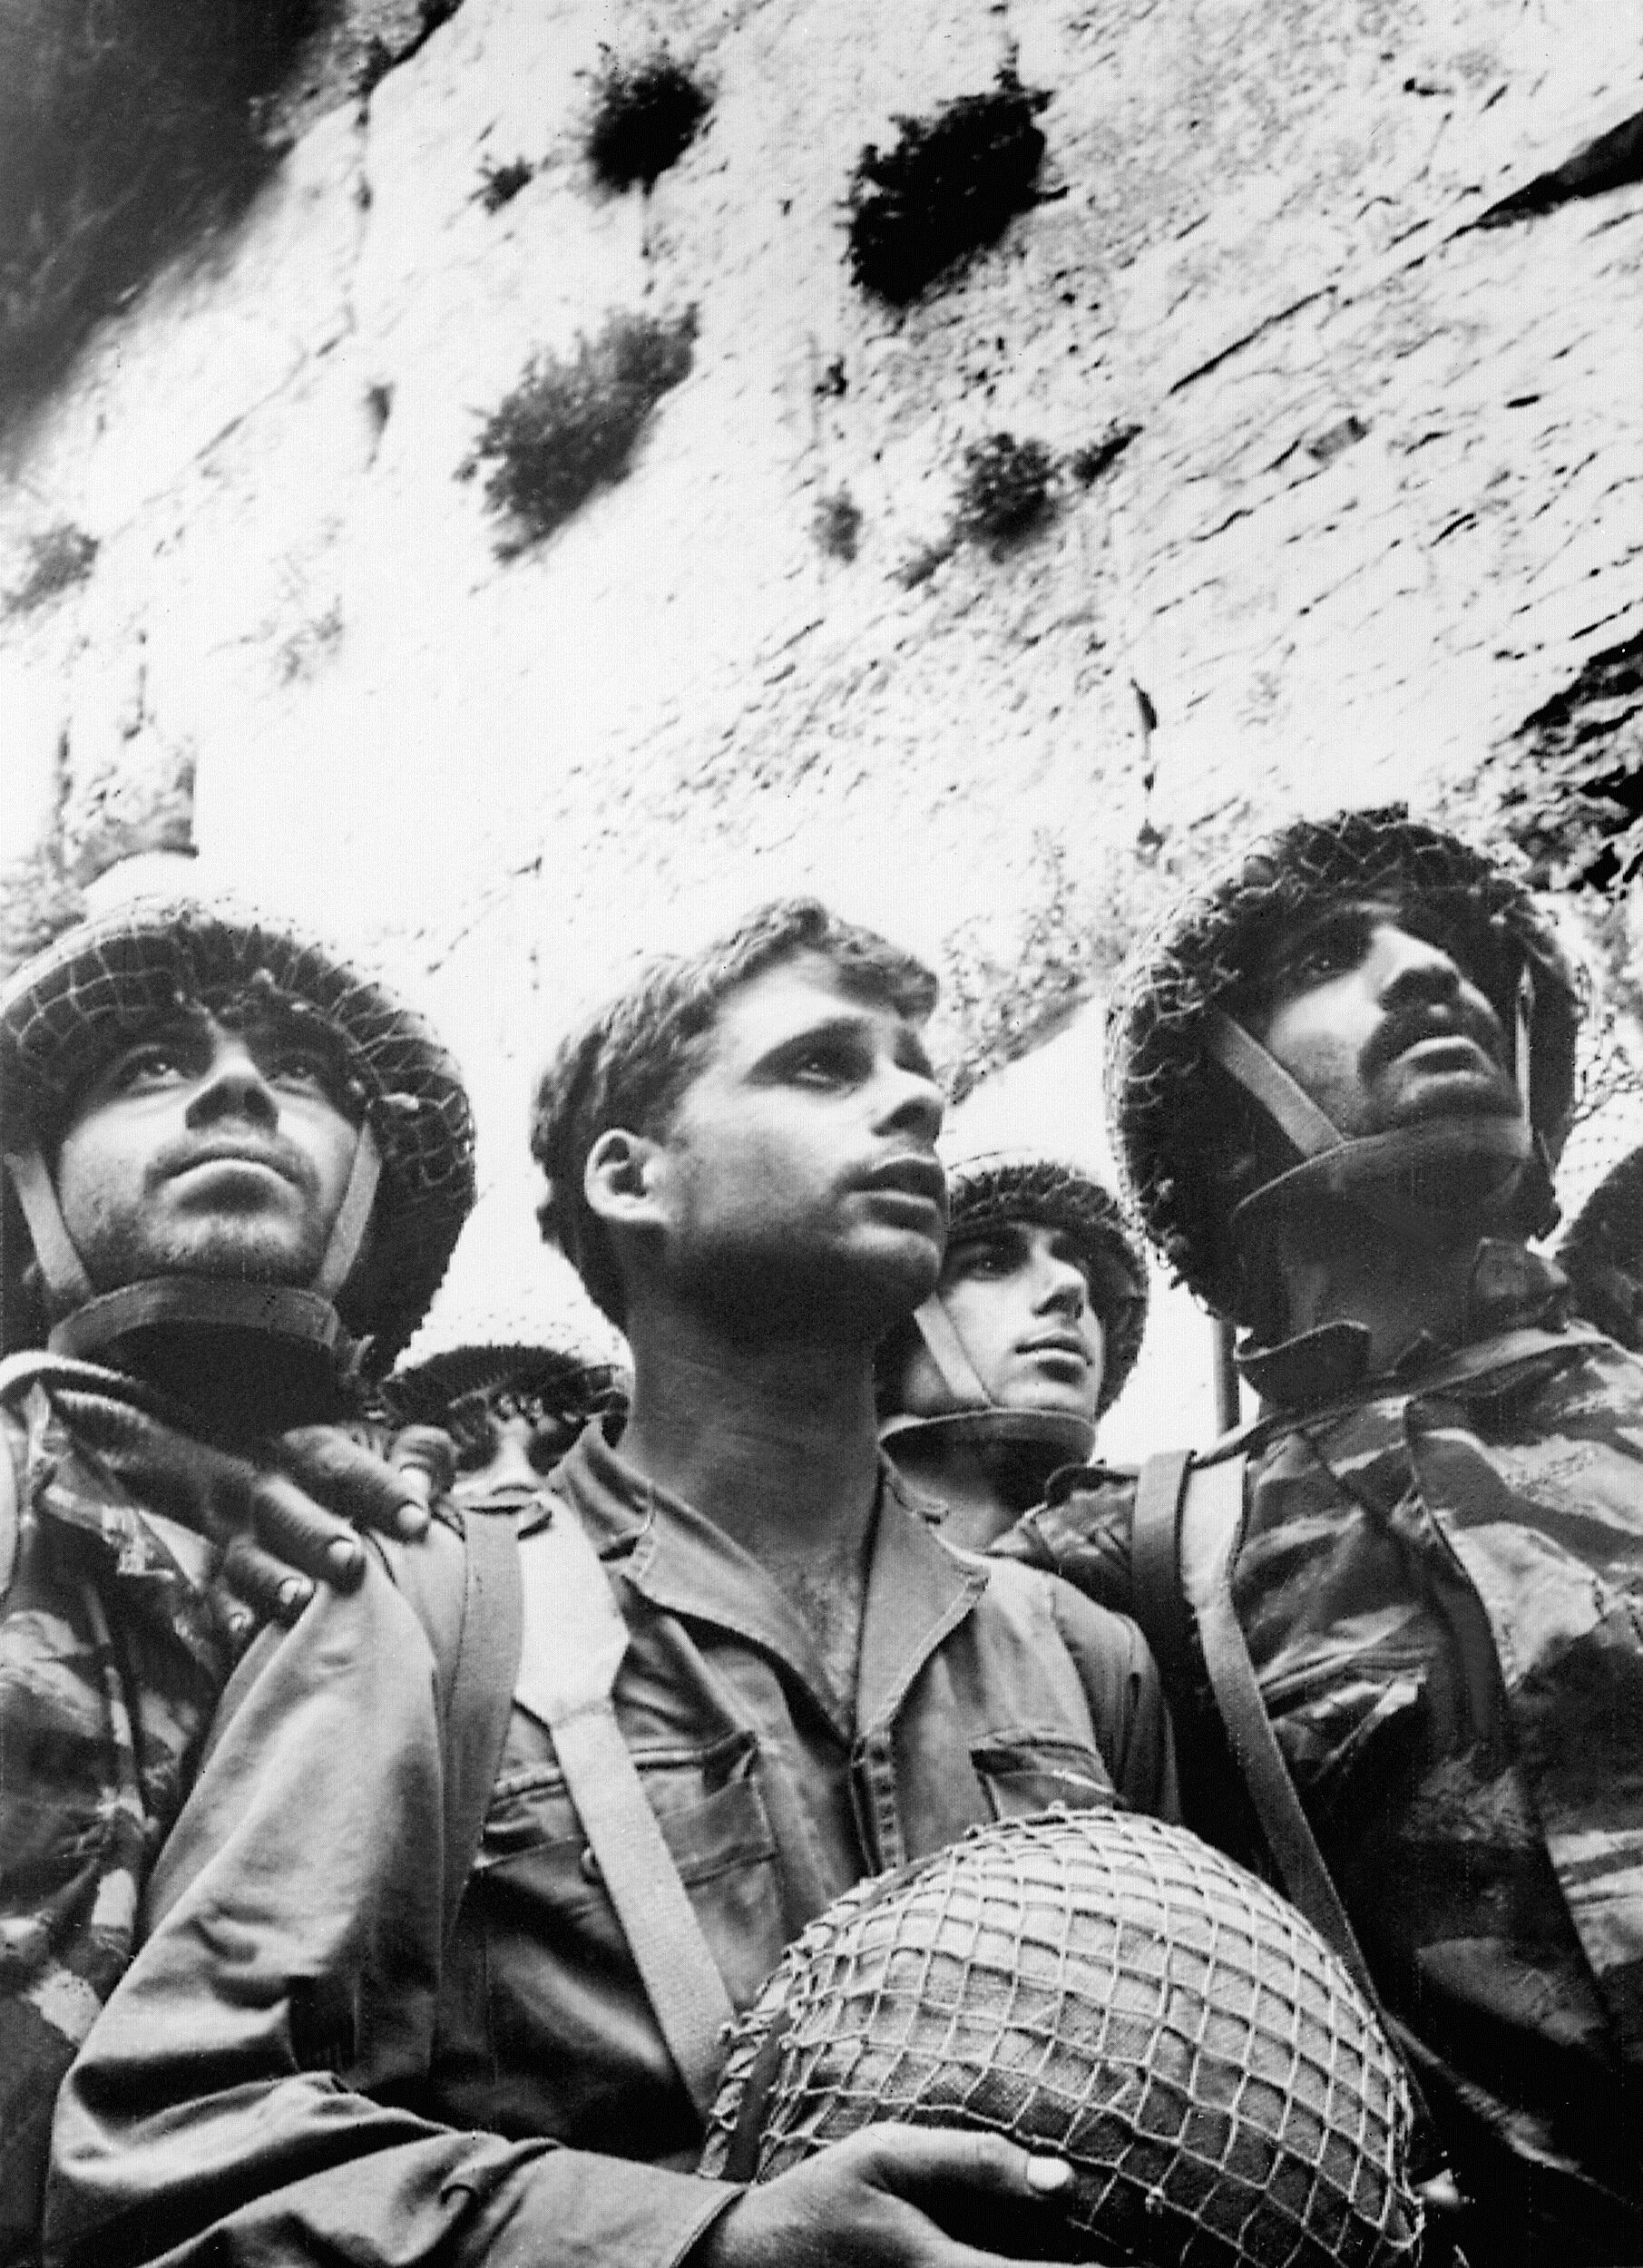 JERUSALEM:Israeli soldiers celebrate 09 June 1967 in Jerusalem the conquest by Israeli troops over Jordan, the Wailing Wall in the eastern part of the Holy City. 05 June 1967, Israel launched a massive air assault that crippled Arab air capability. Israel